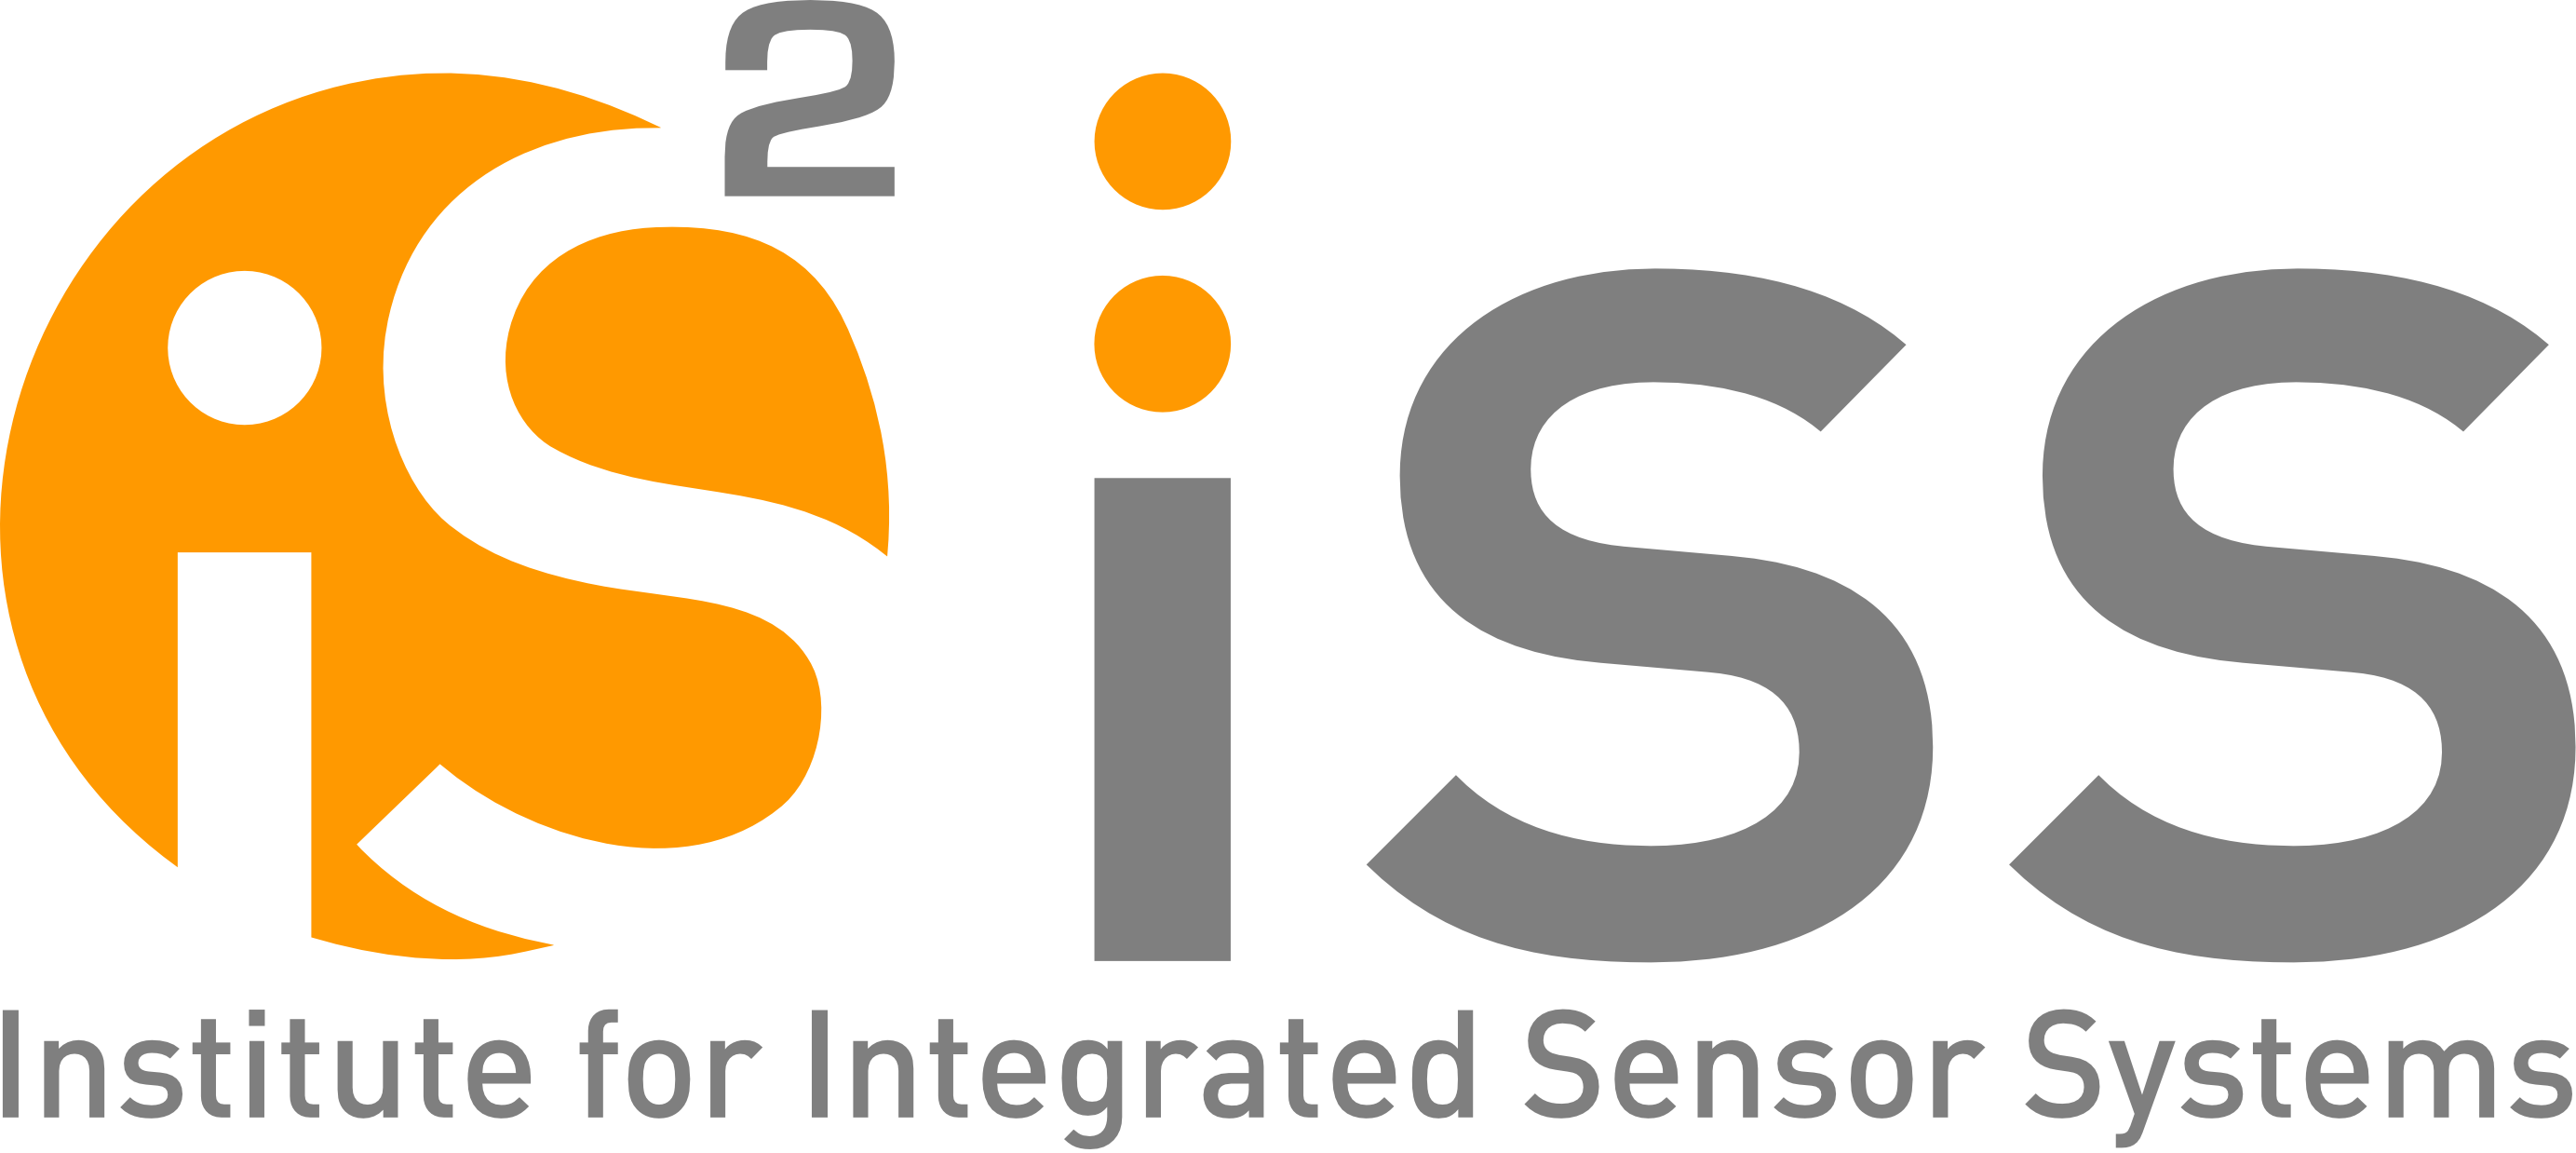 Institute for Integrated Sensor Systems